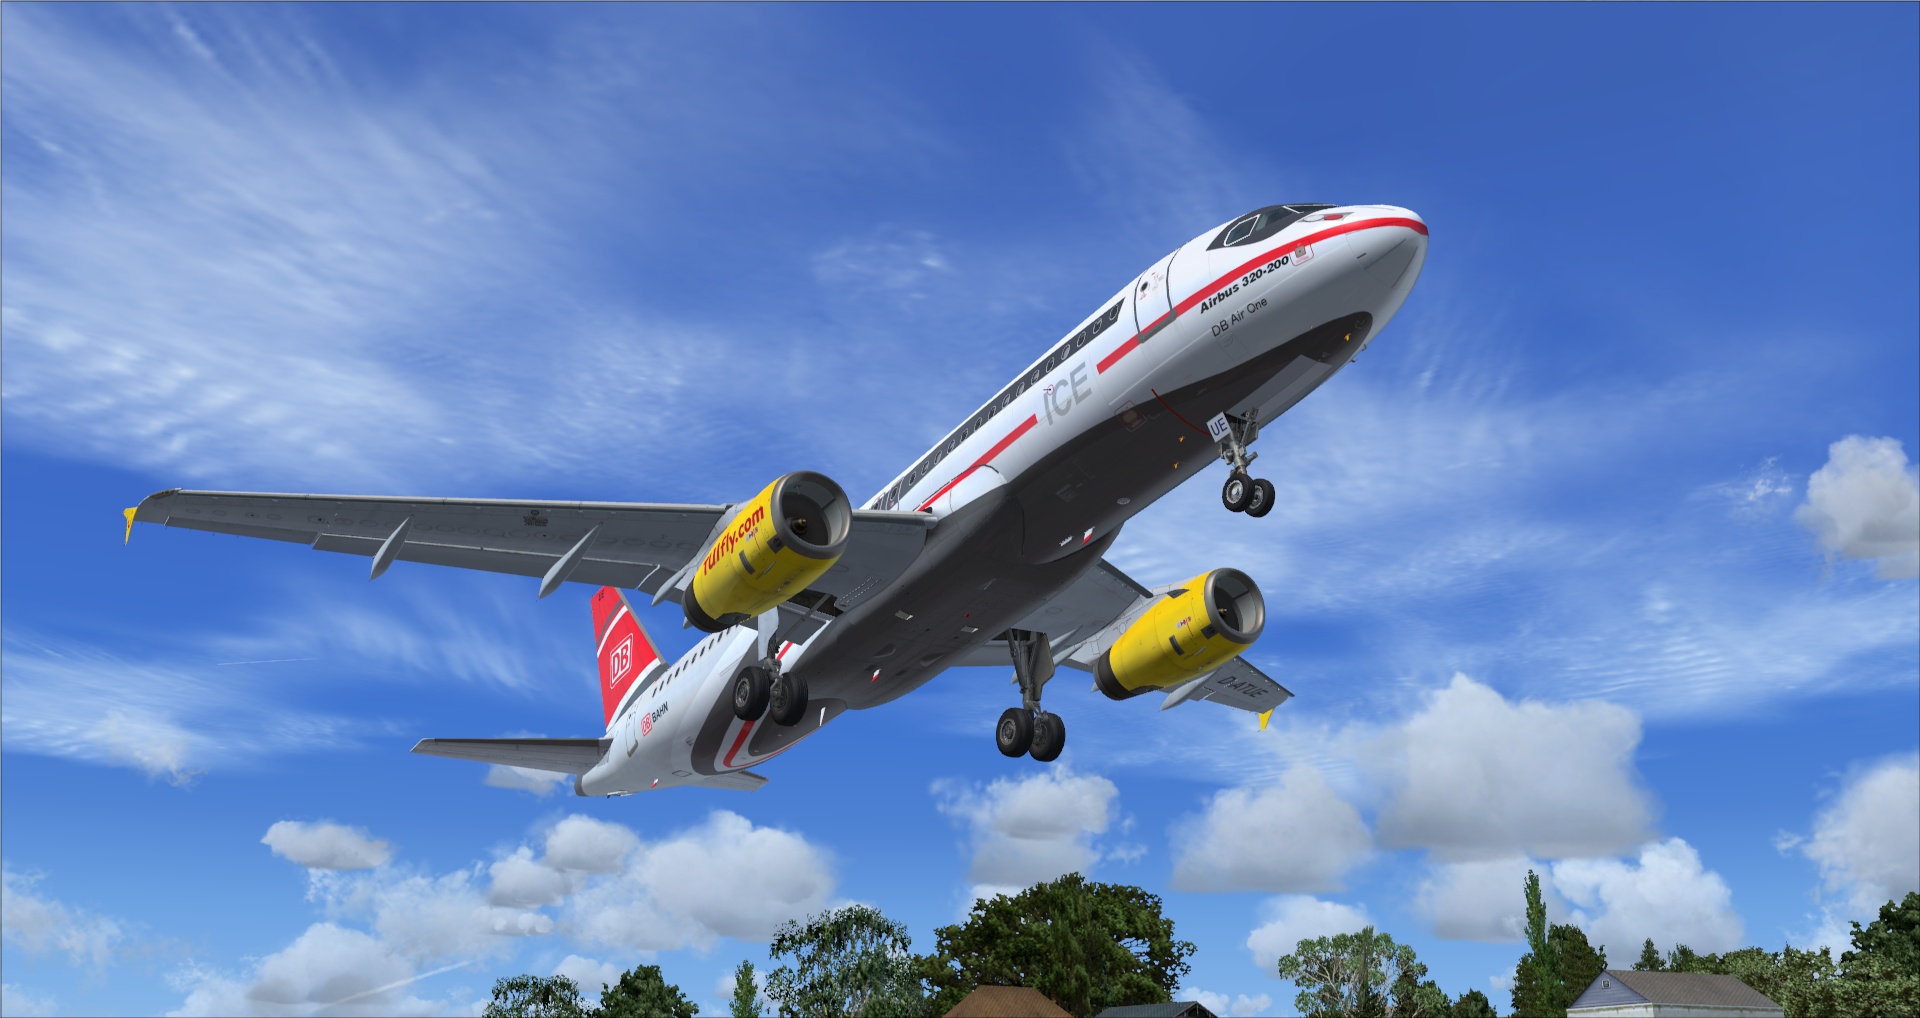 More information about "Tuifly DB AirOne fictional A320 IAE D-ATUE"